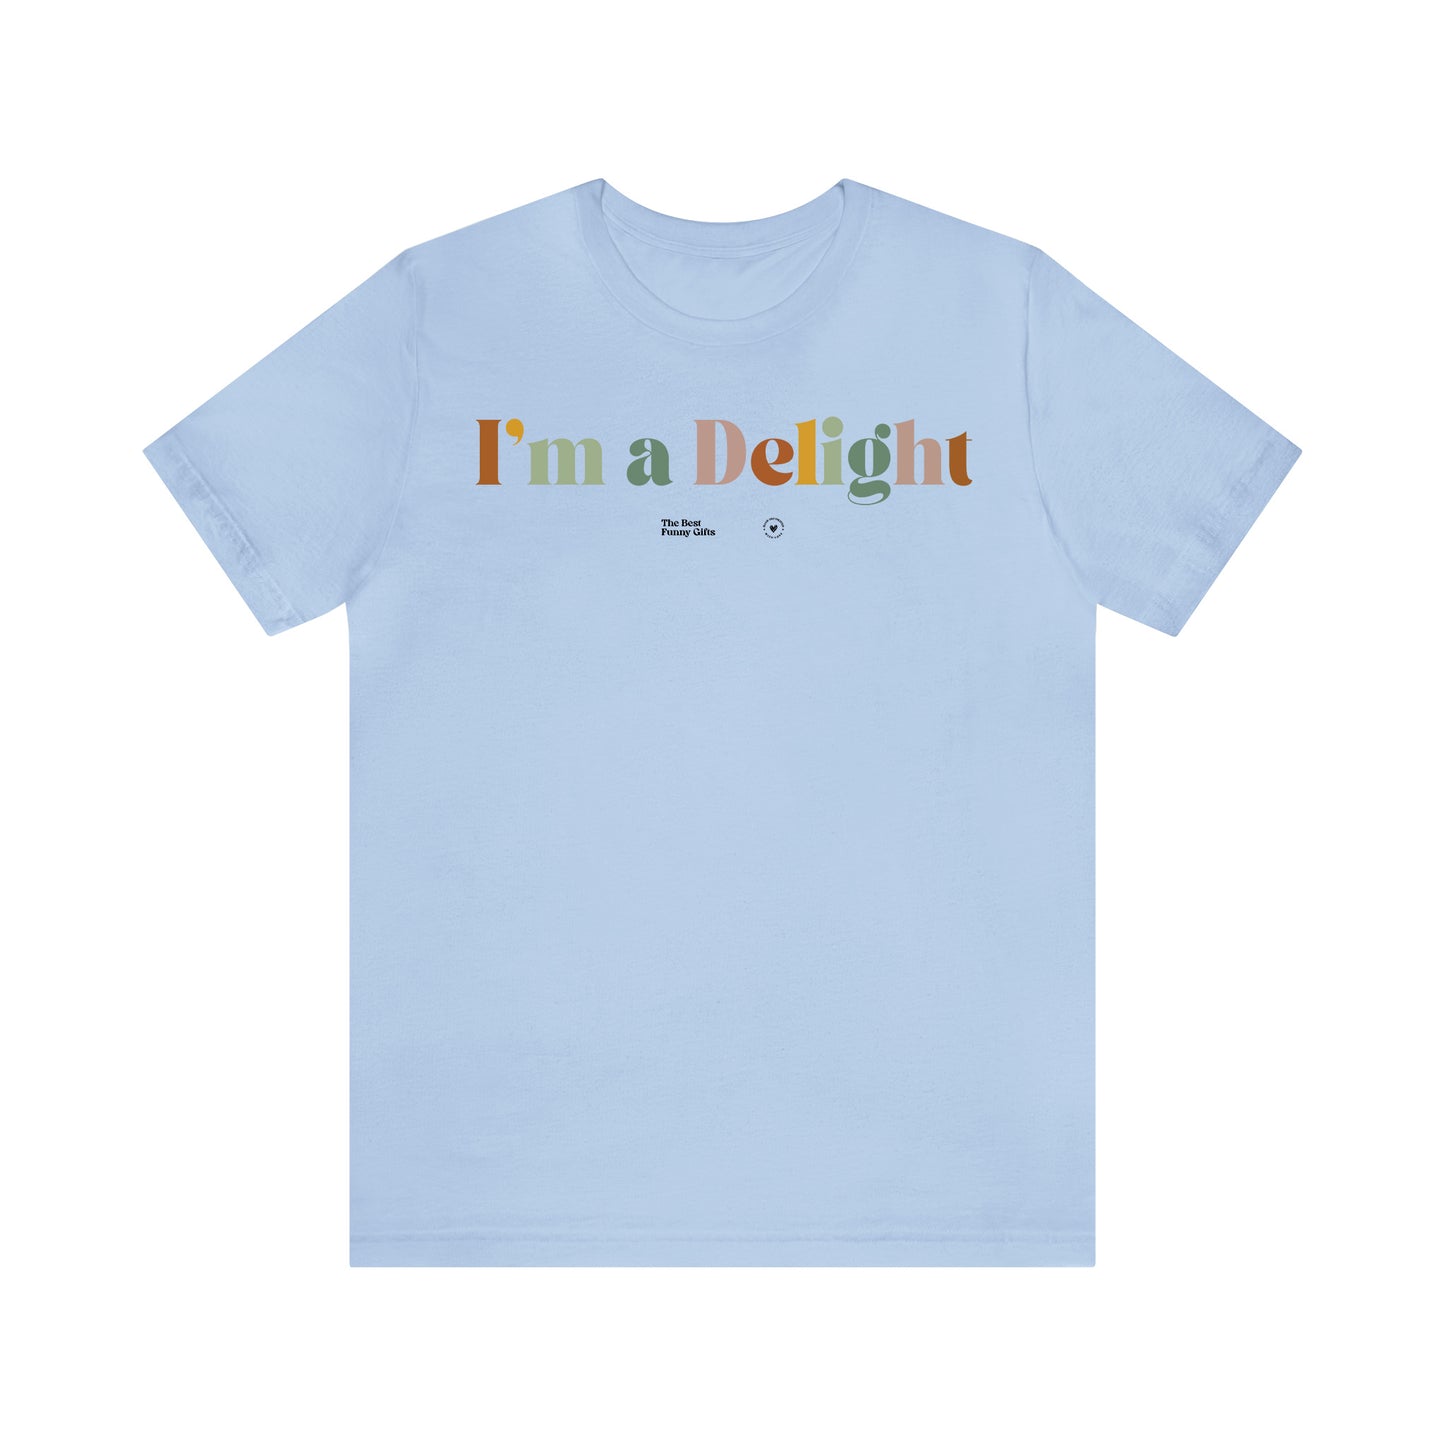 Funny Shirts for Women - I'm a Delight - Women’s T Shirts